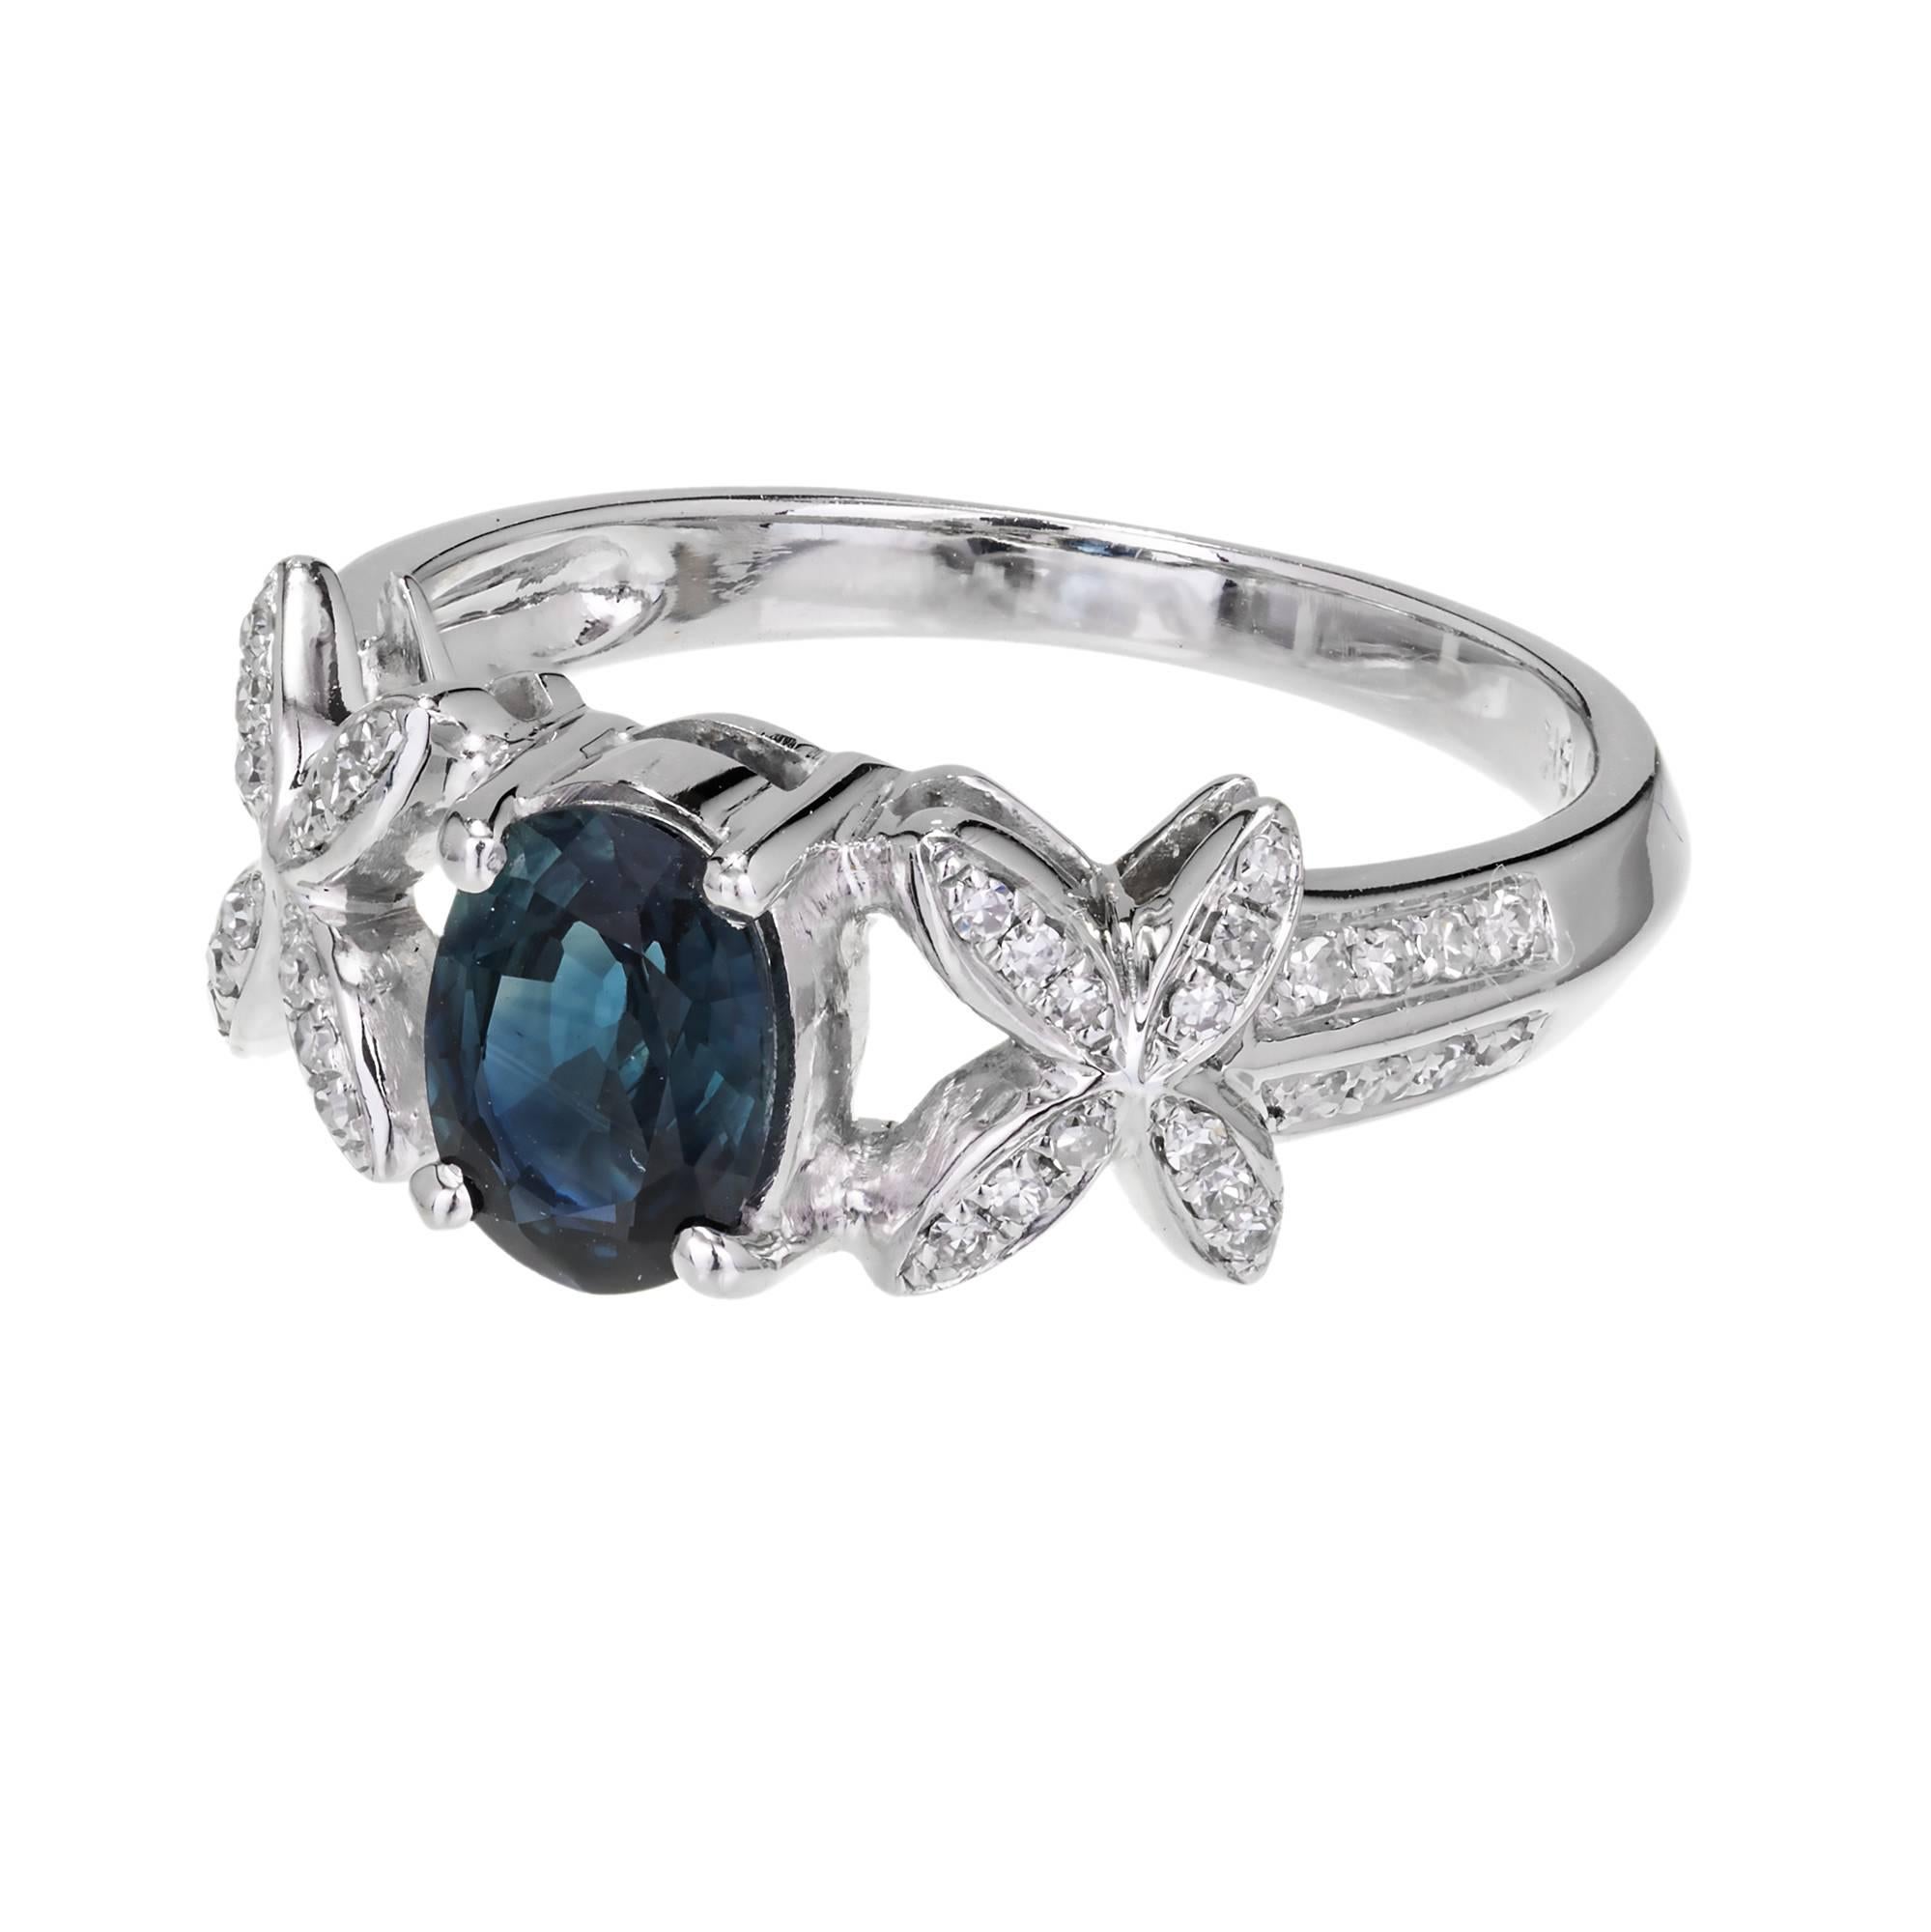 Blue oval natural corundum Sapphire in an “X” design engagement ring. 18k white gold setting with Diamond accents. GIA certified simple heat only.

1 Oval sapphire, approx. total weight. 1.00cts. GIA Certificate# 5182337720
40 single cut Diamonds,